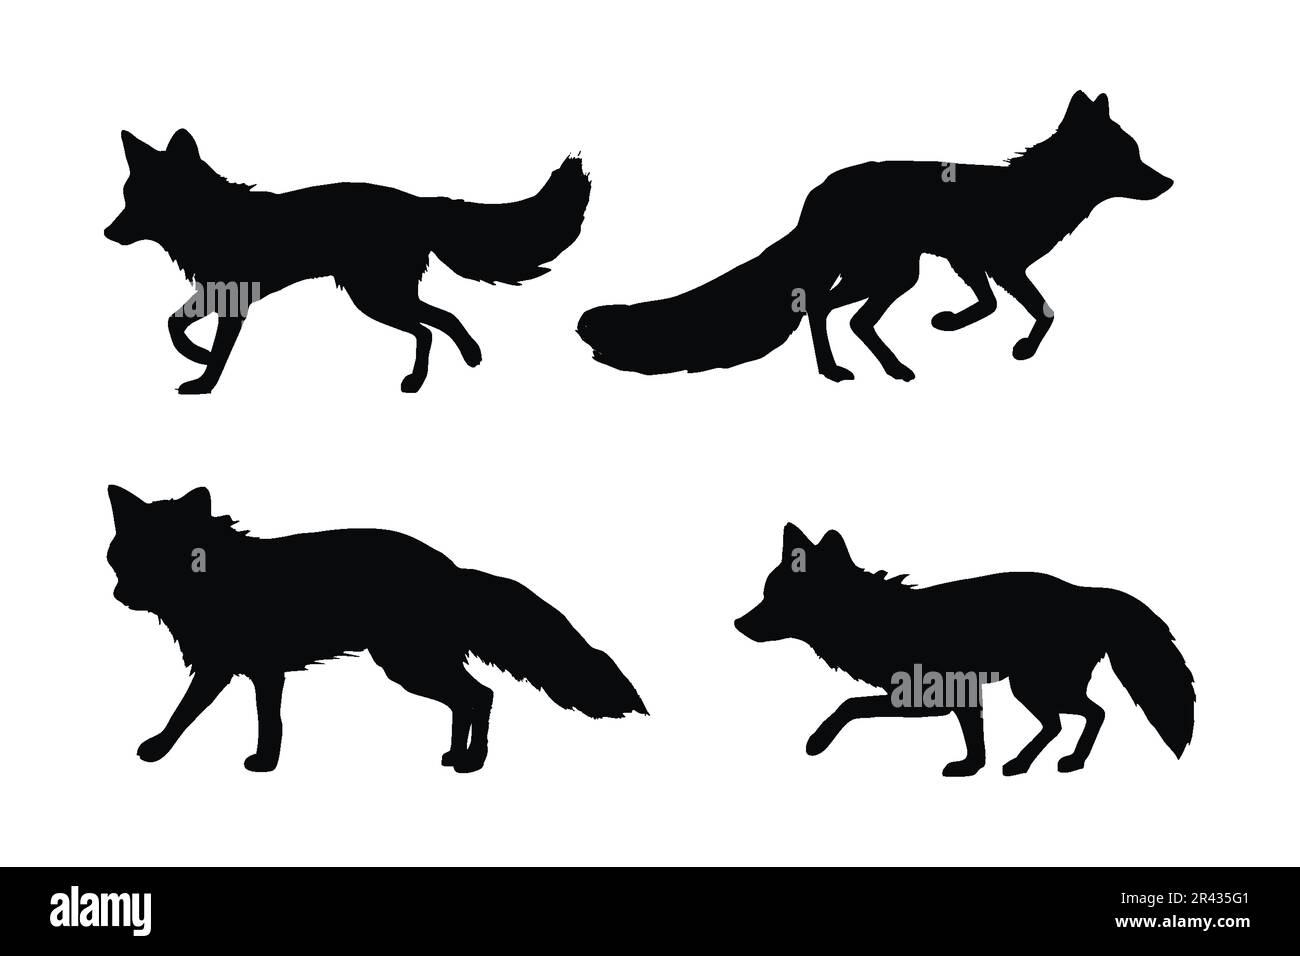 Foxes walking different positions, silhouette set vector. Adult fox silhouette collection on a white background. Carnivore animals like foxes, jackals Stock Vector